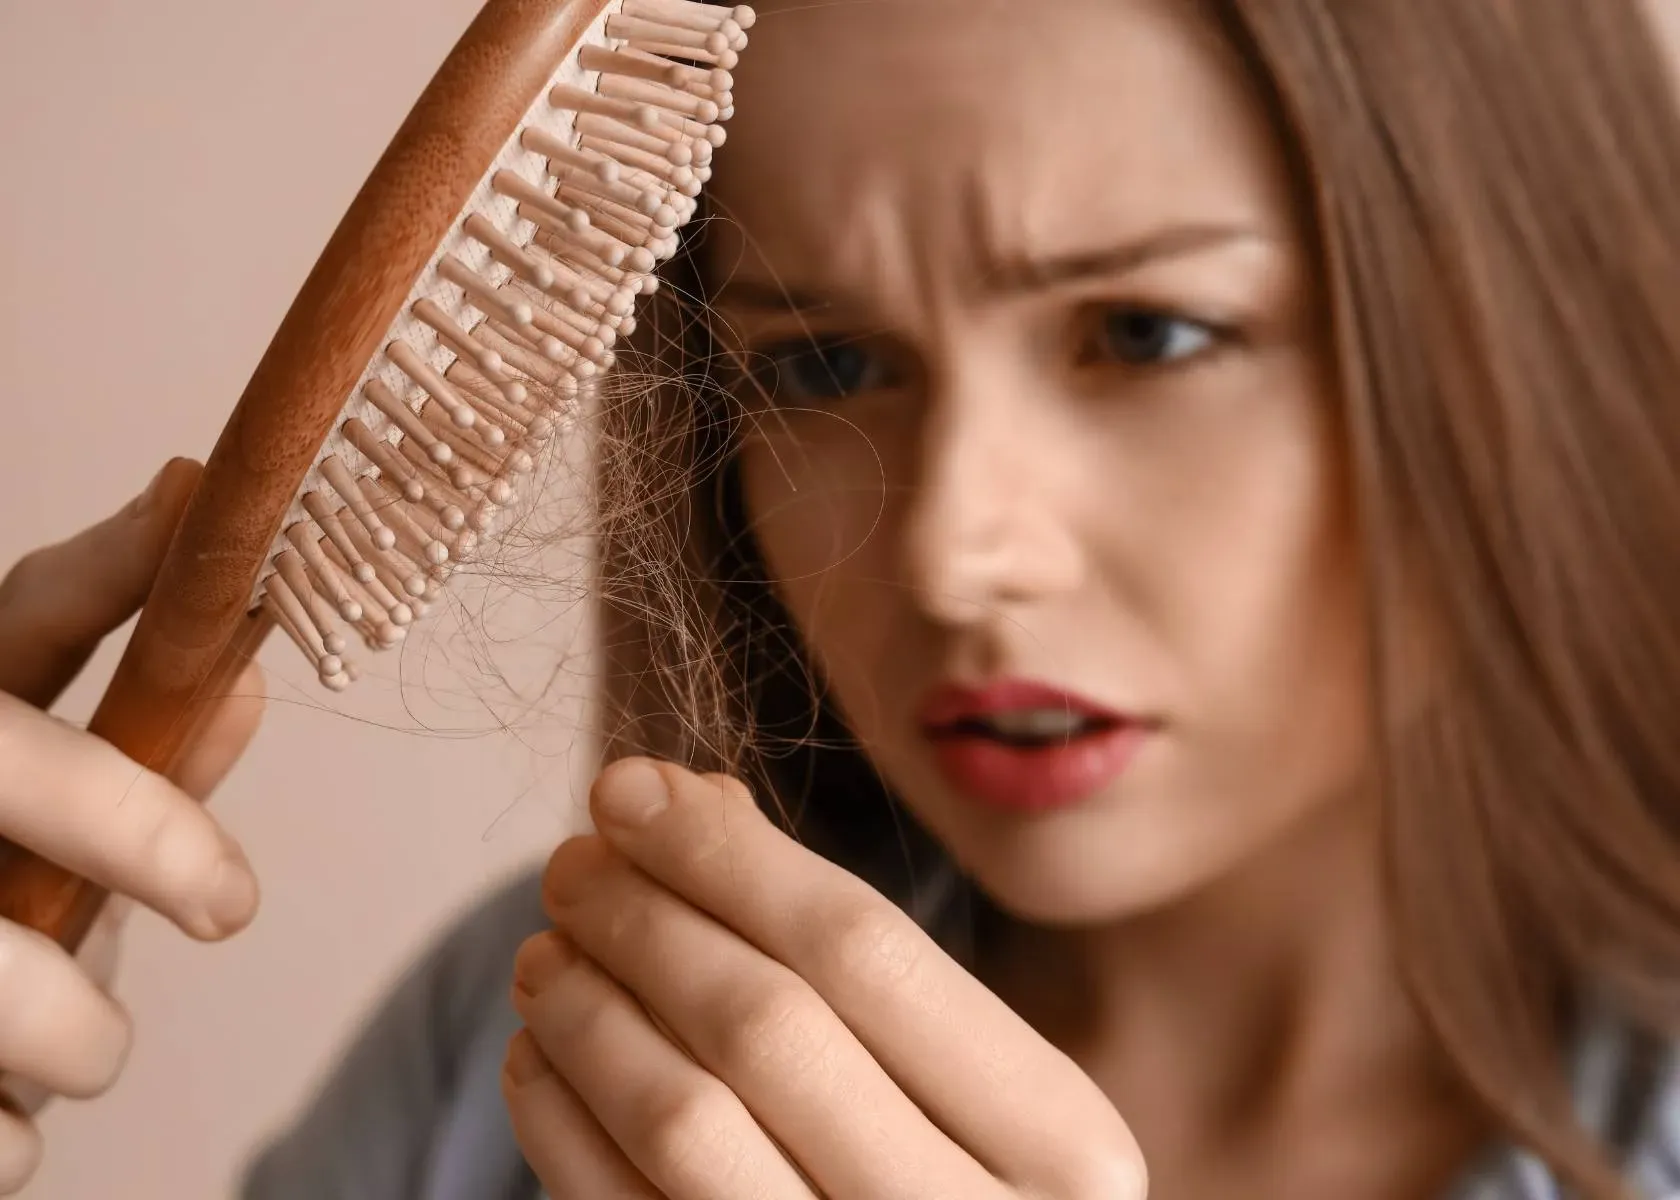 Other Factors that May Contribute to Hair Loss